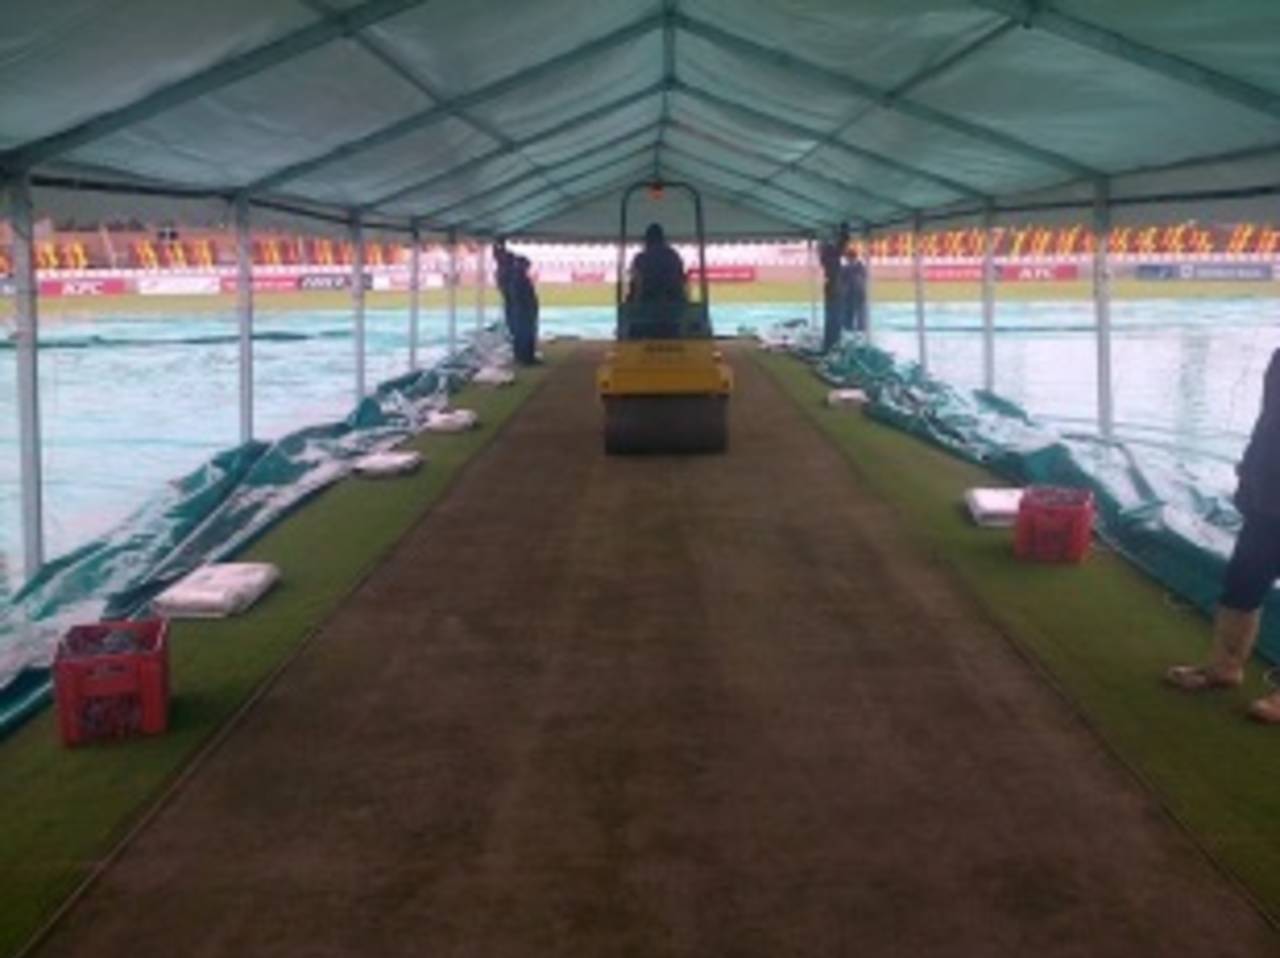 The ground staff at Benoni erected a tent and worked through heavy rain to prepare the pitch for the tour game&nbsp;&nbsp;&bull;&nbsp;&nbsp;Brendon Frost